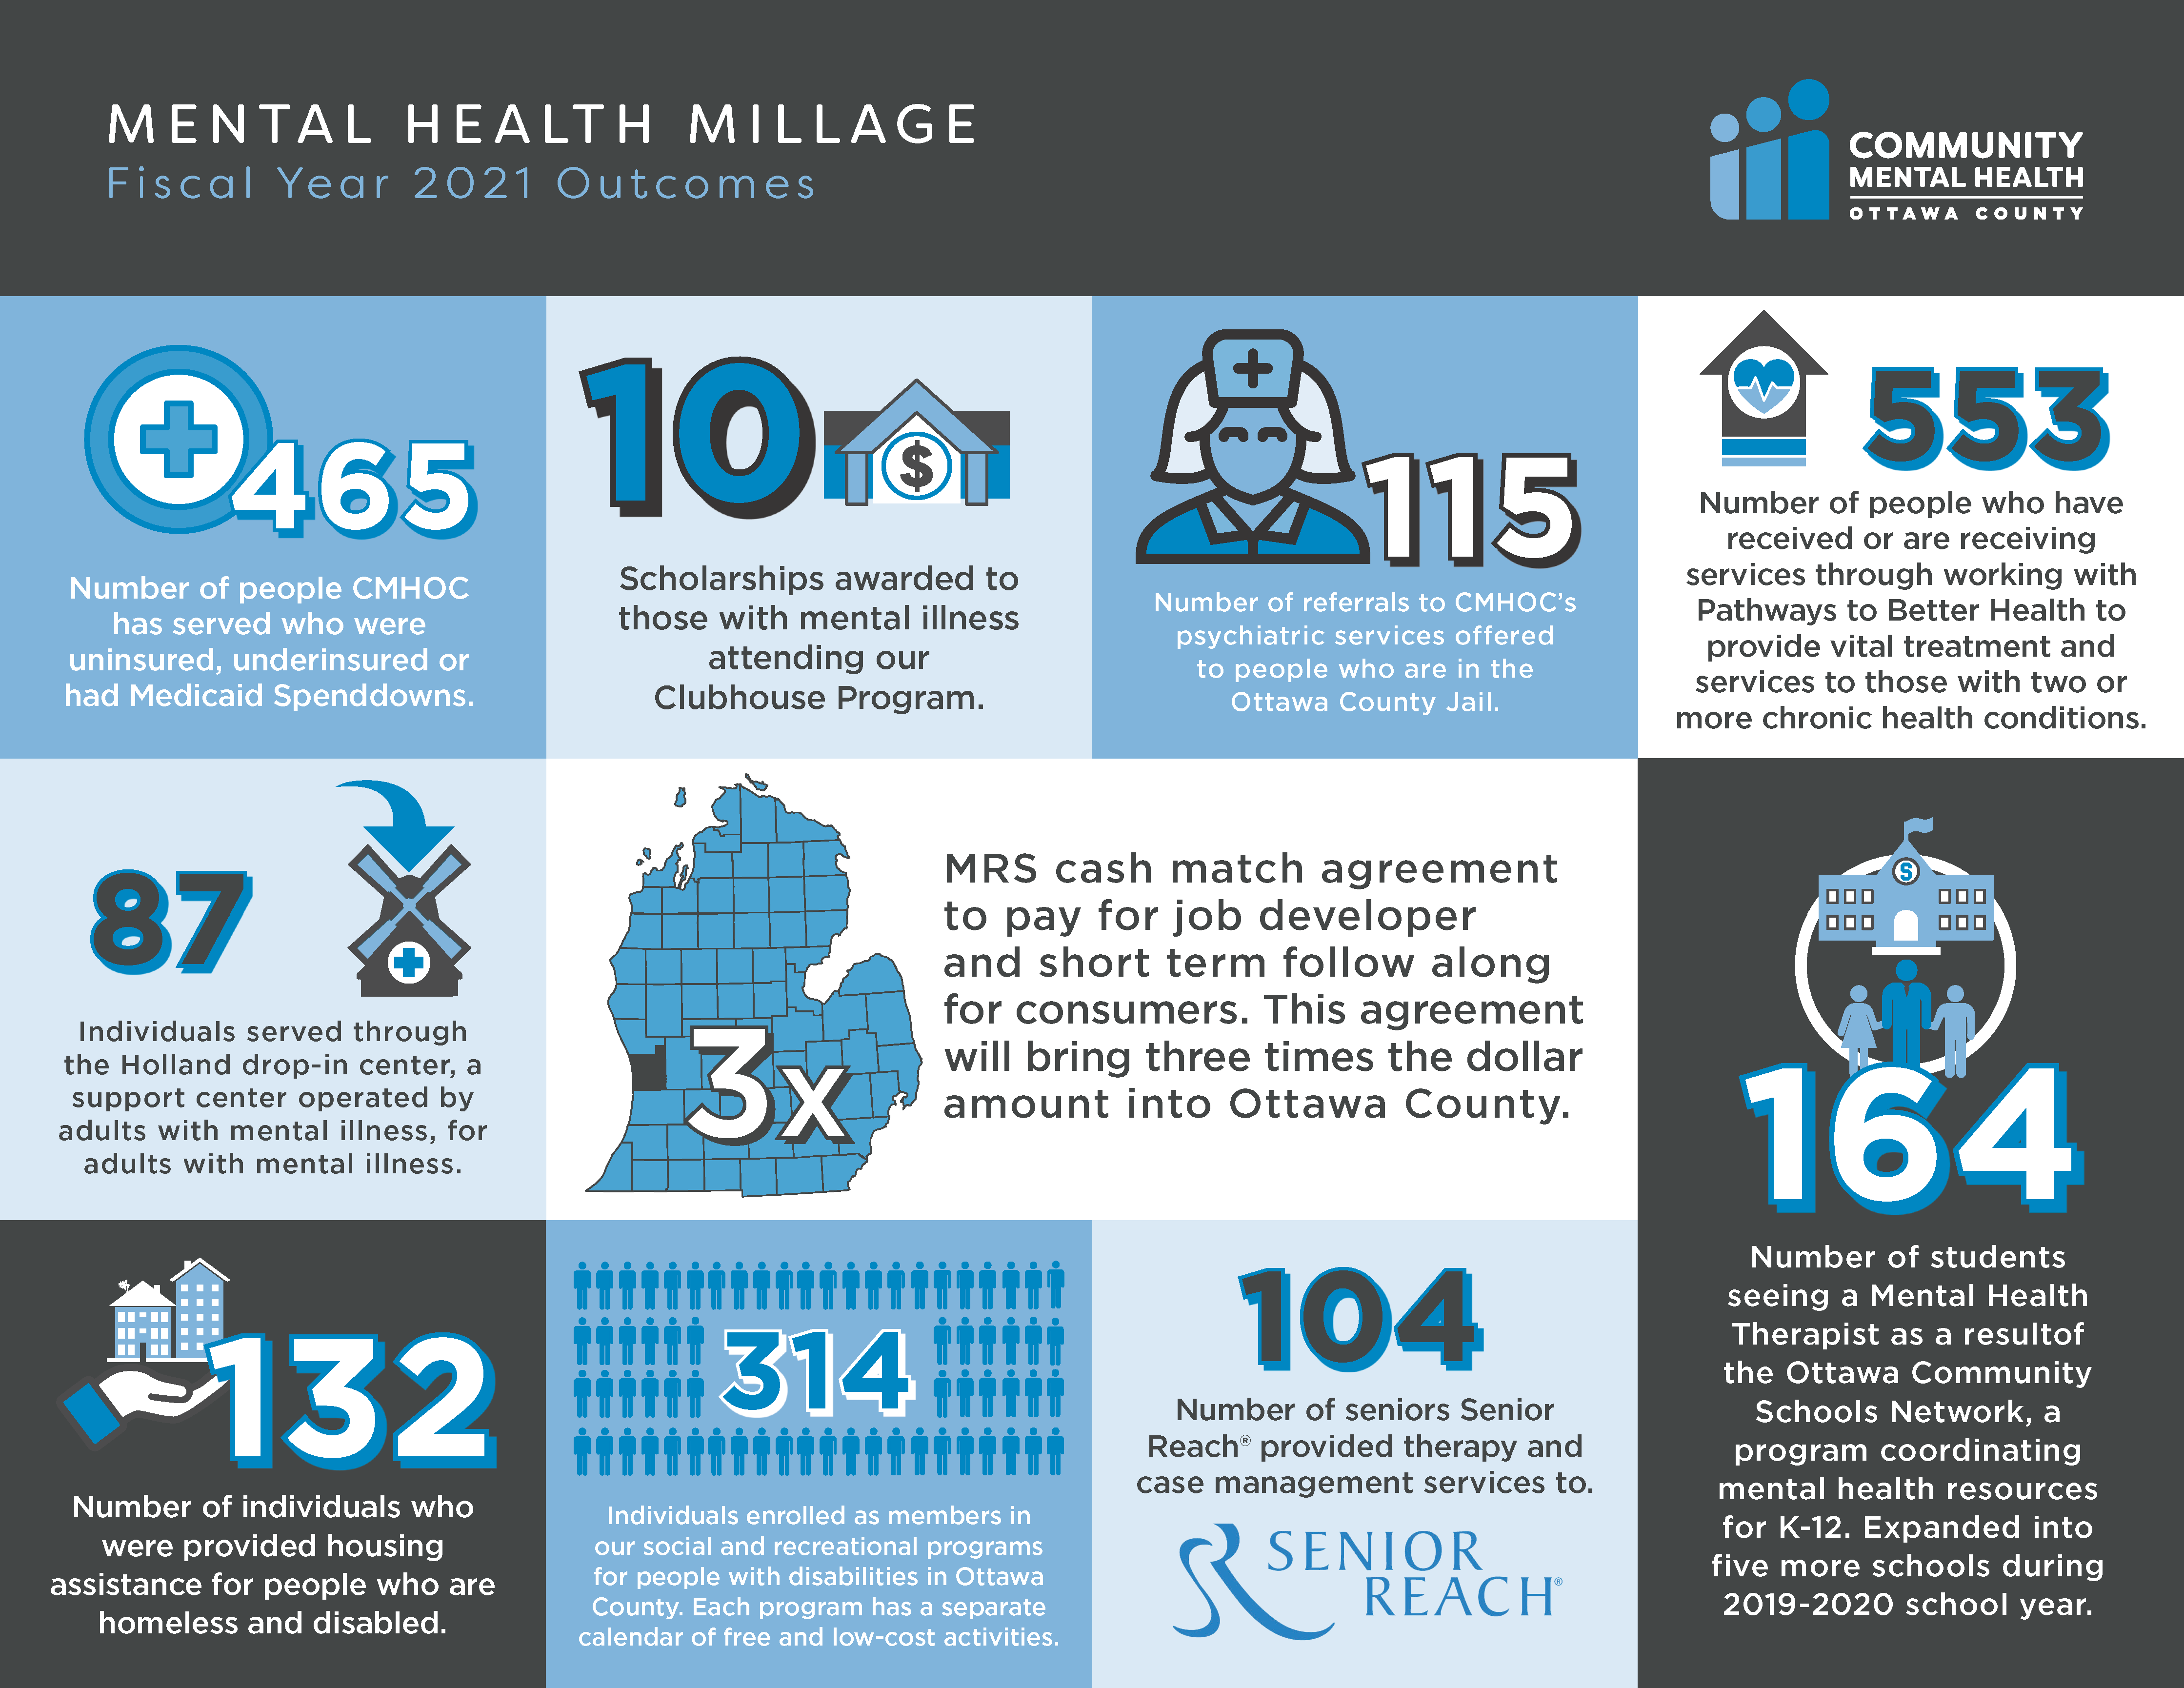 Mental Health Millage Fiscal Year 2021 Outcome Infographic